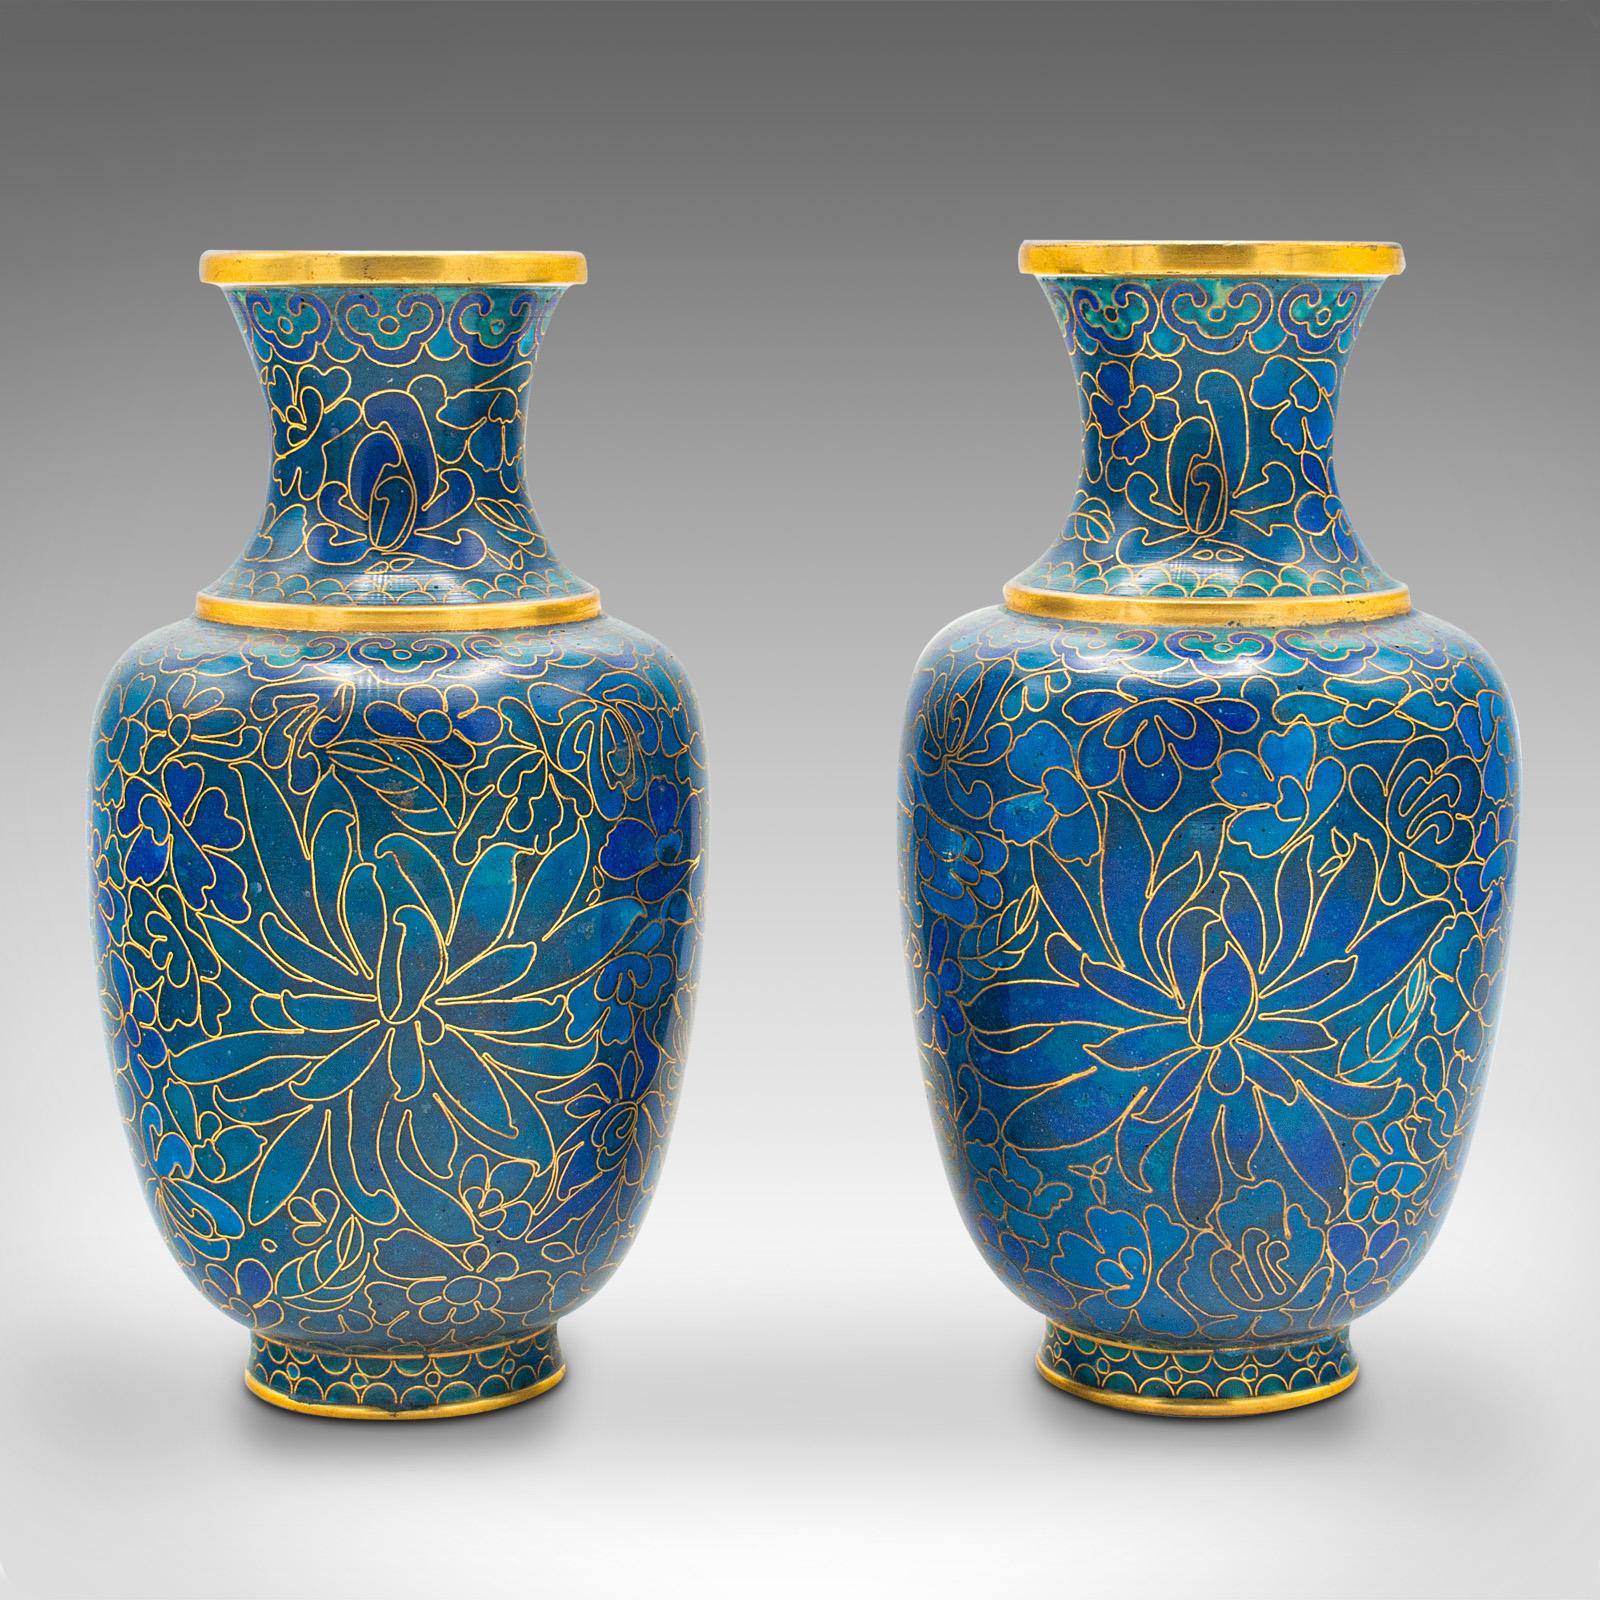 This is a pair of small vintage posy vases. A Japanese, cloisonne baluster, dating to the late Art Deco period, circa 1940.

Striking blue hues and gilt decor accentuate this charming pair of vases
Displaying a desirable aged patina and in good